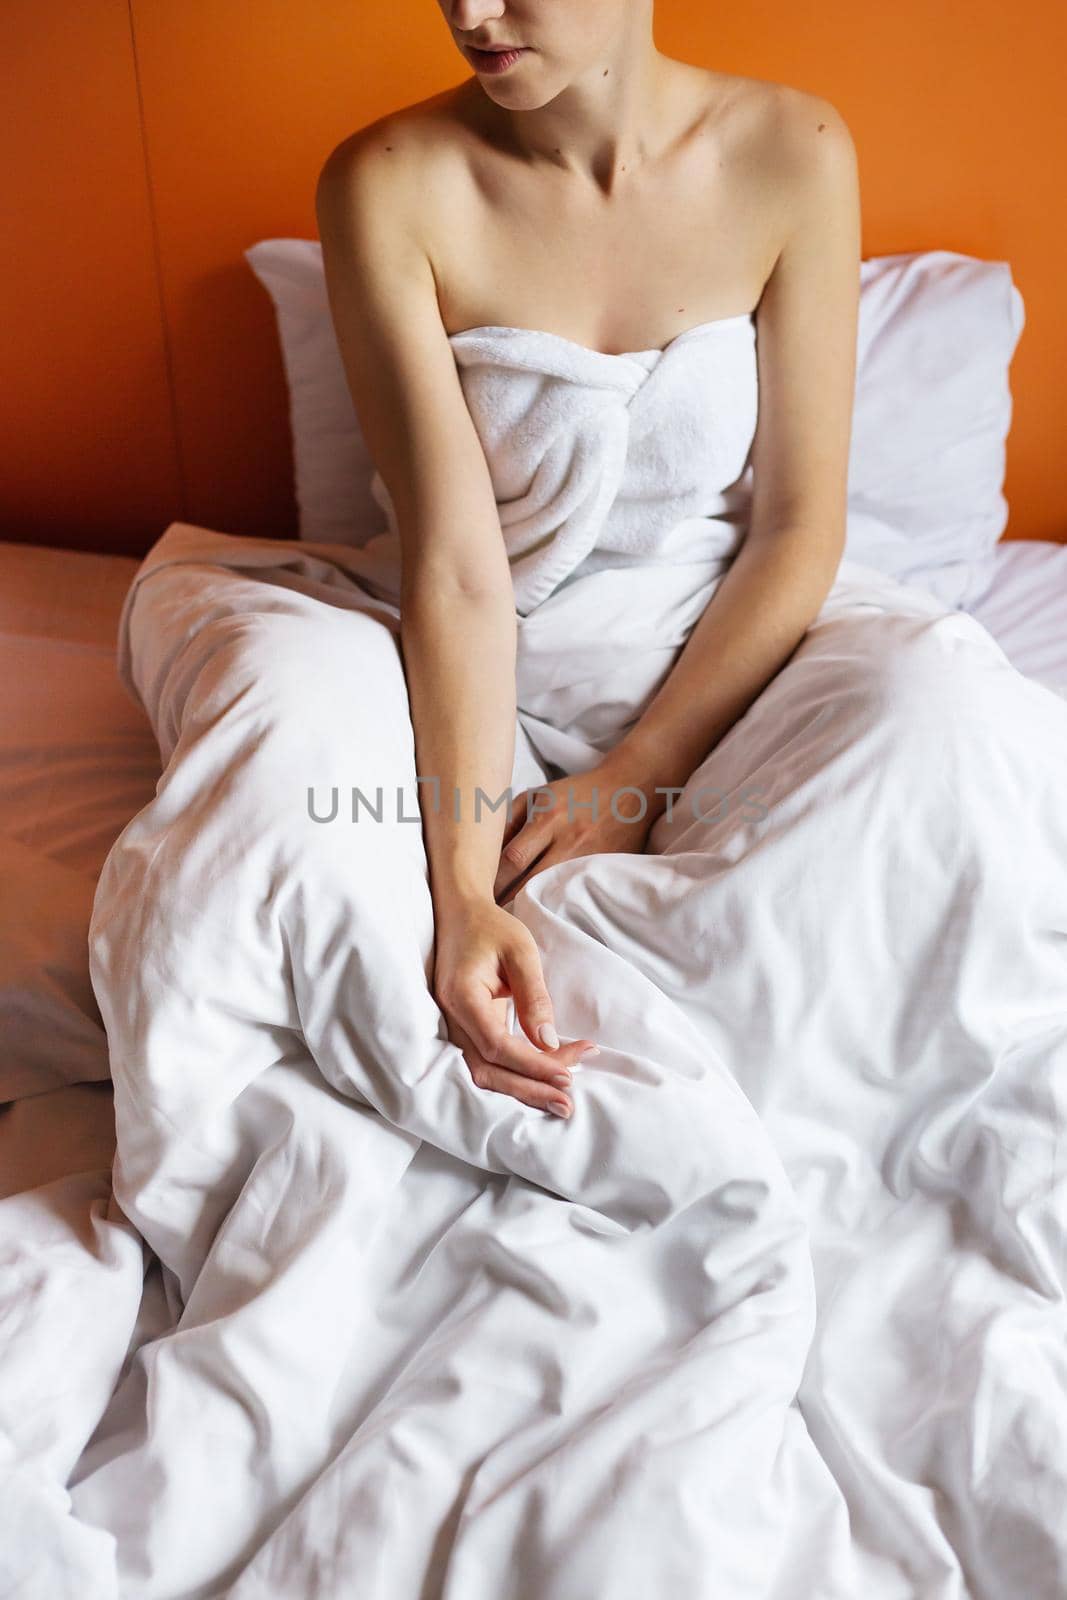 Young girl with clean skin with a towel on her head, lying in bed, resting after a shower, relaxing at home. Close-up